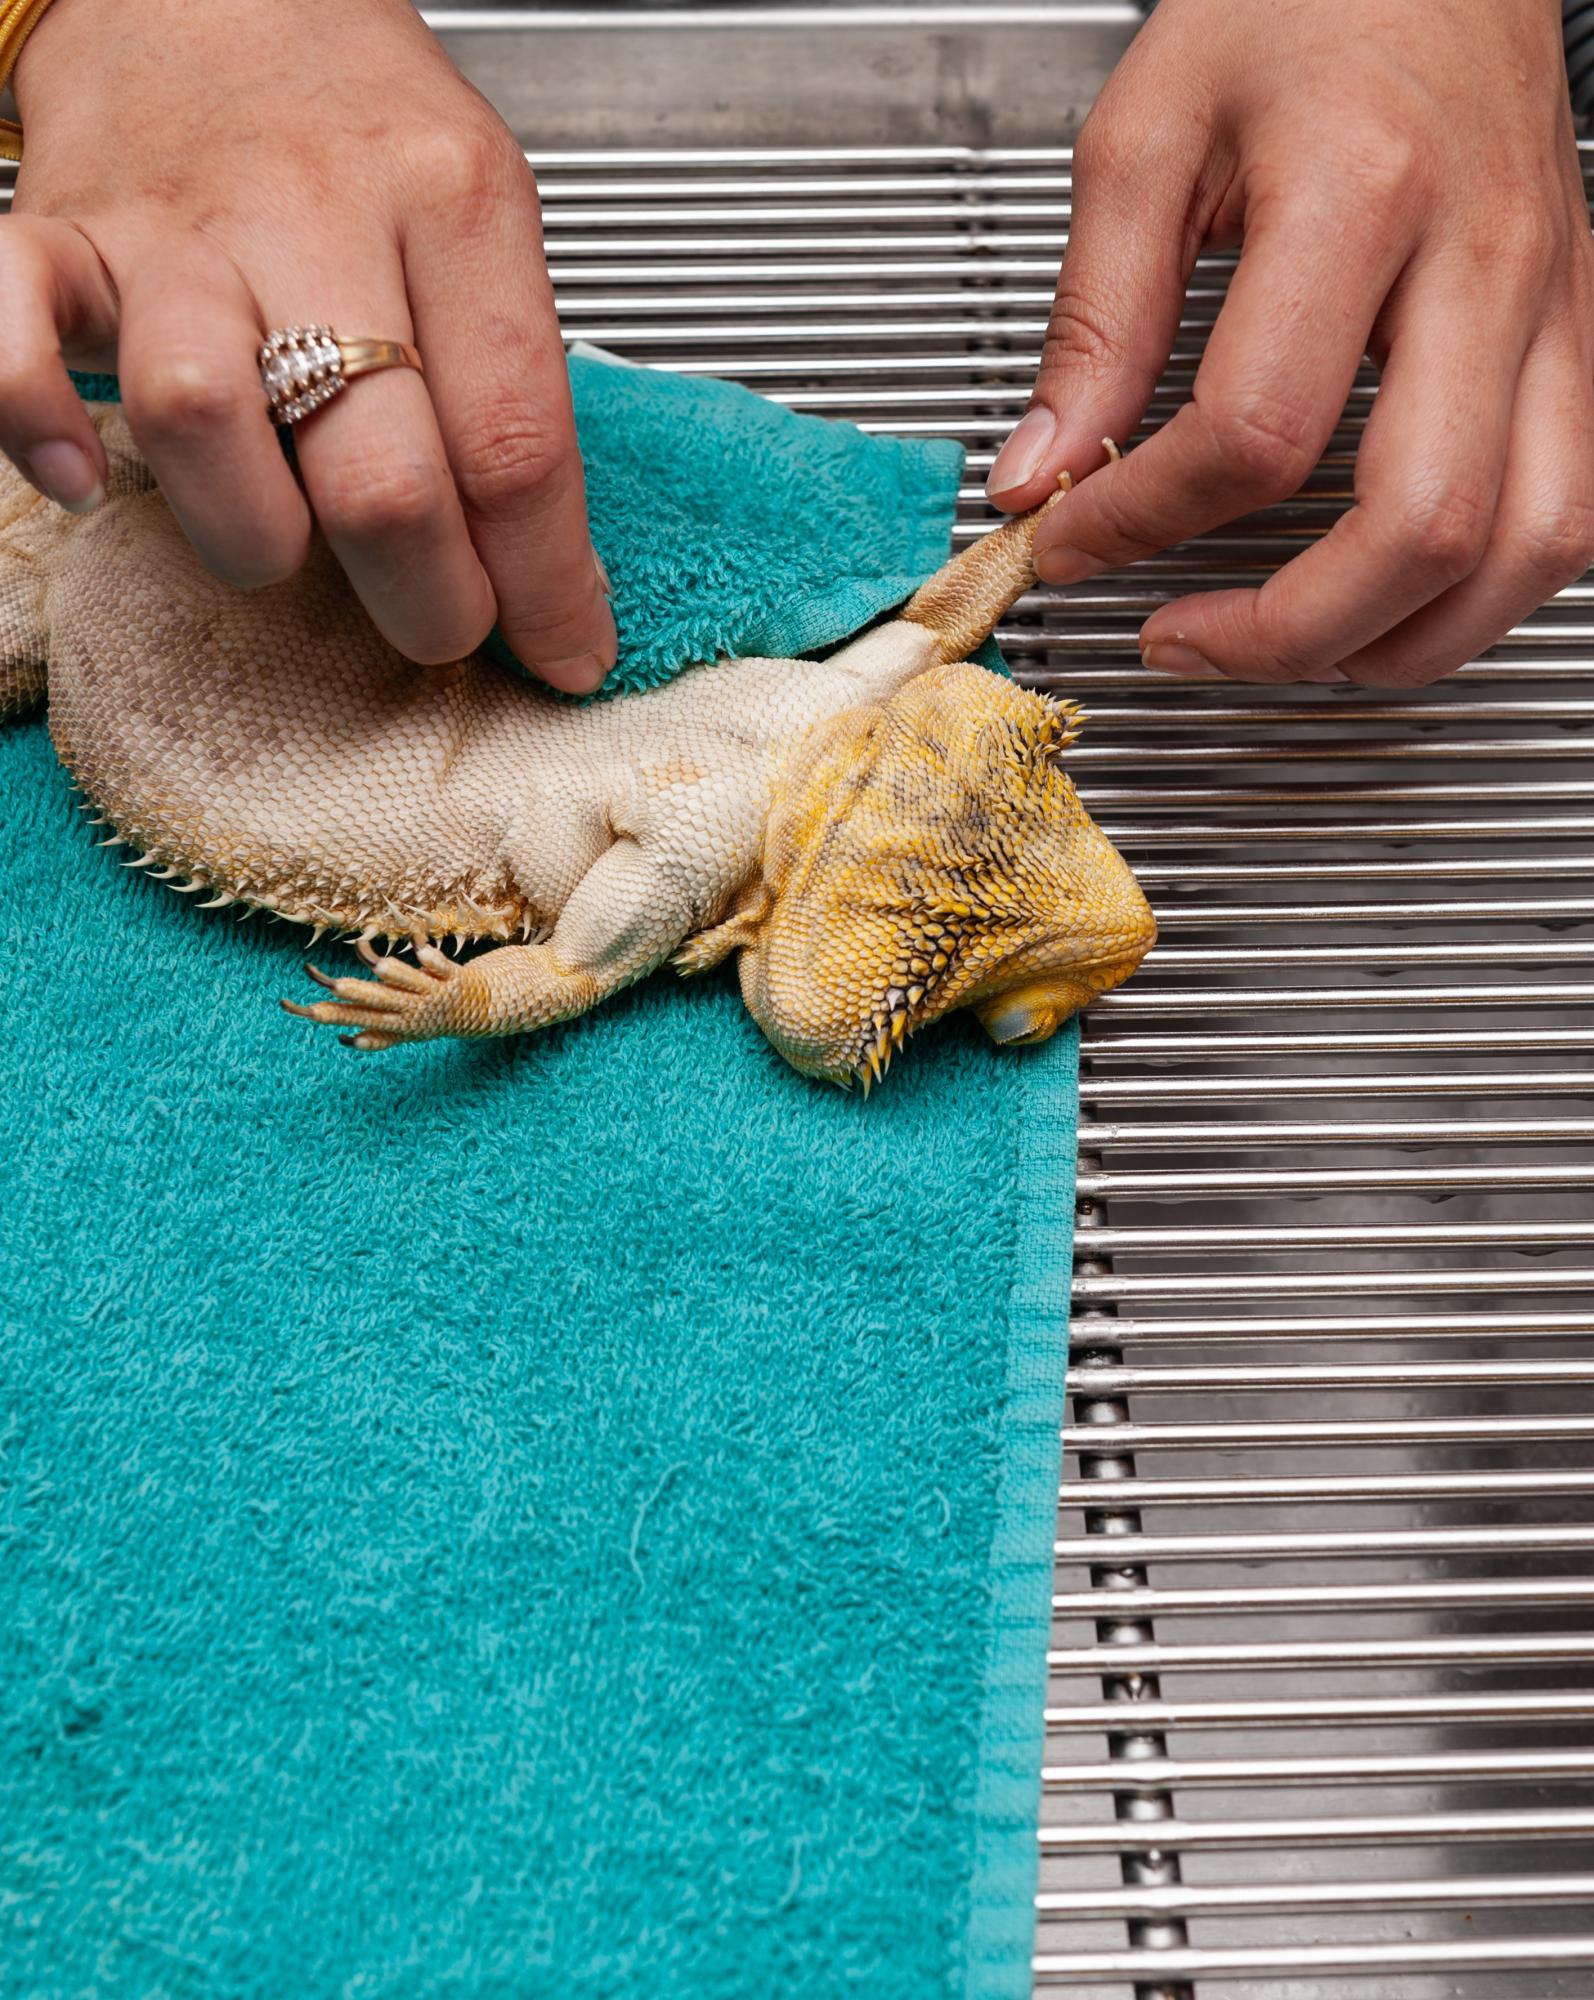 Displaced - Failed resuscitation of a Yellow Bearded Dragon.